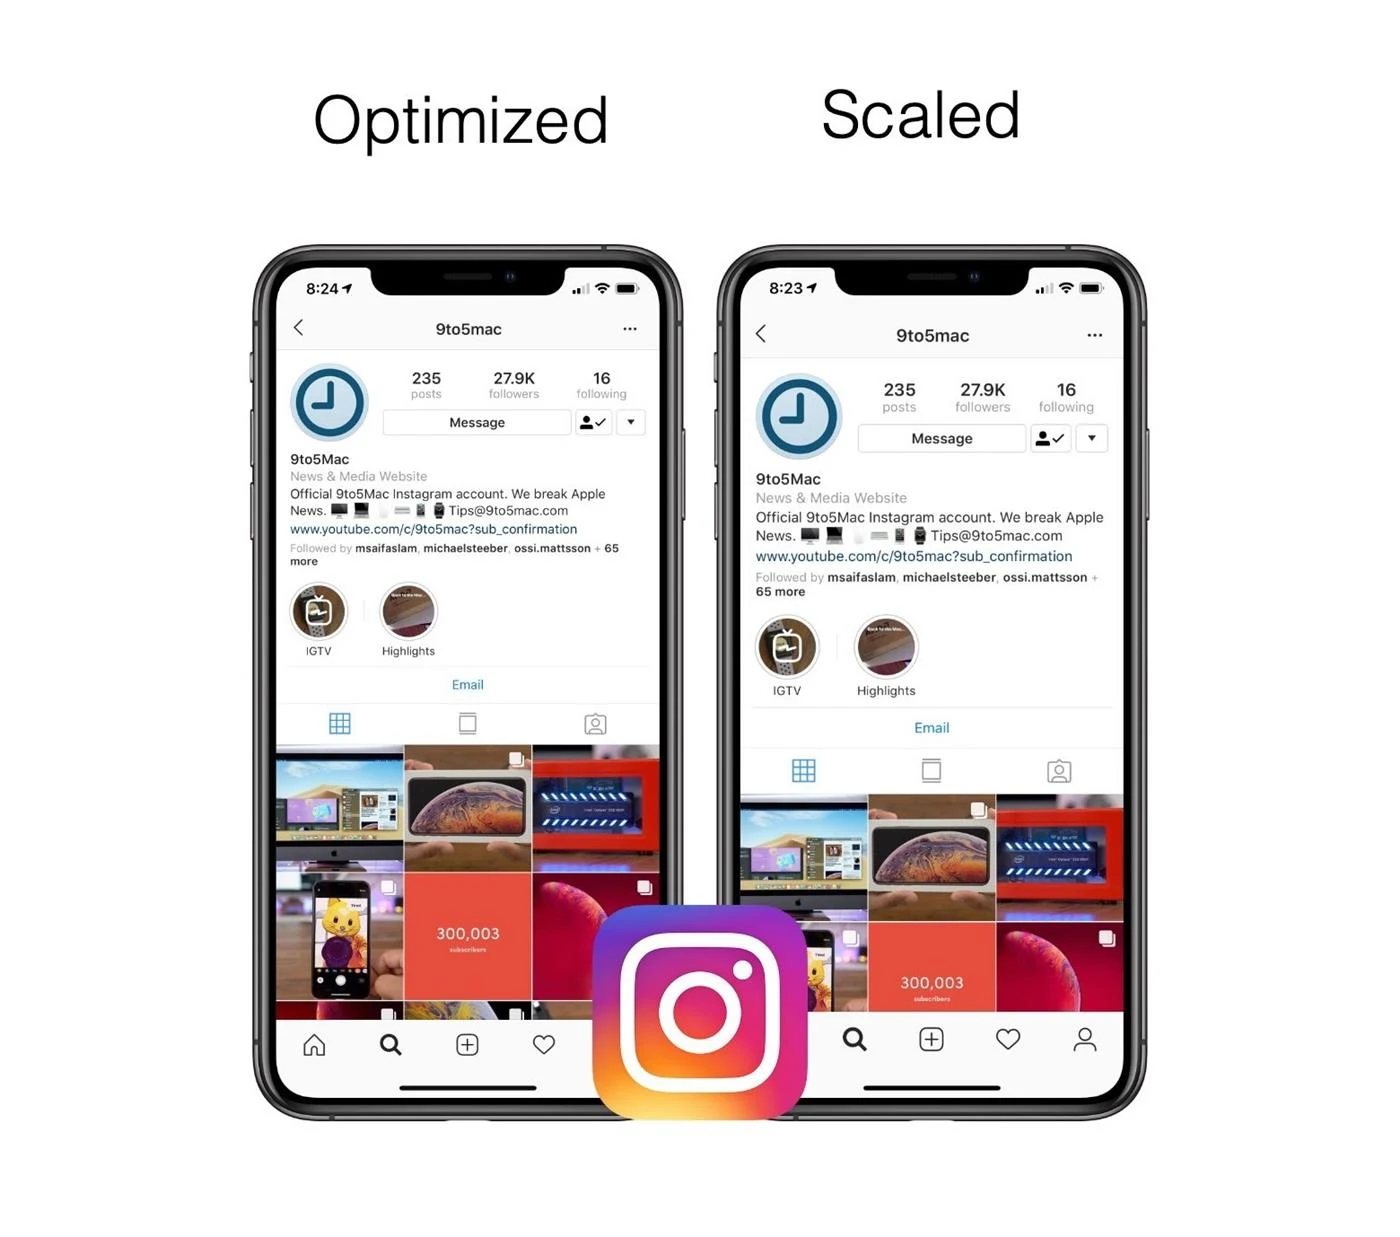 Instagram for iPhone XR and XS Max no longer optimized? Here’s why